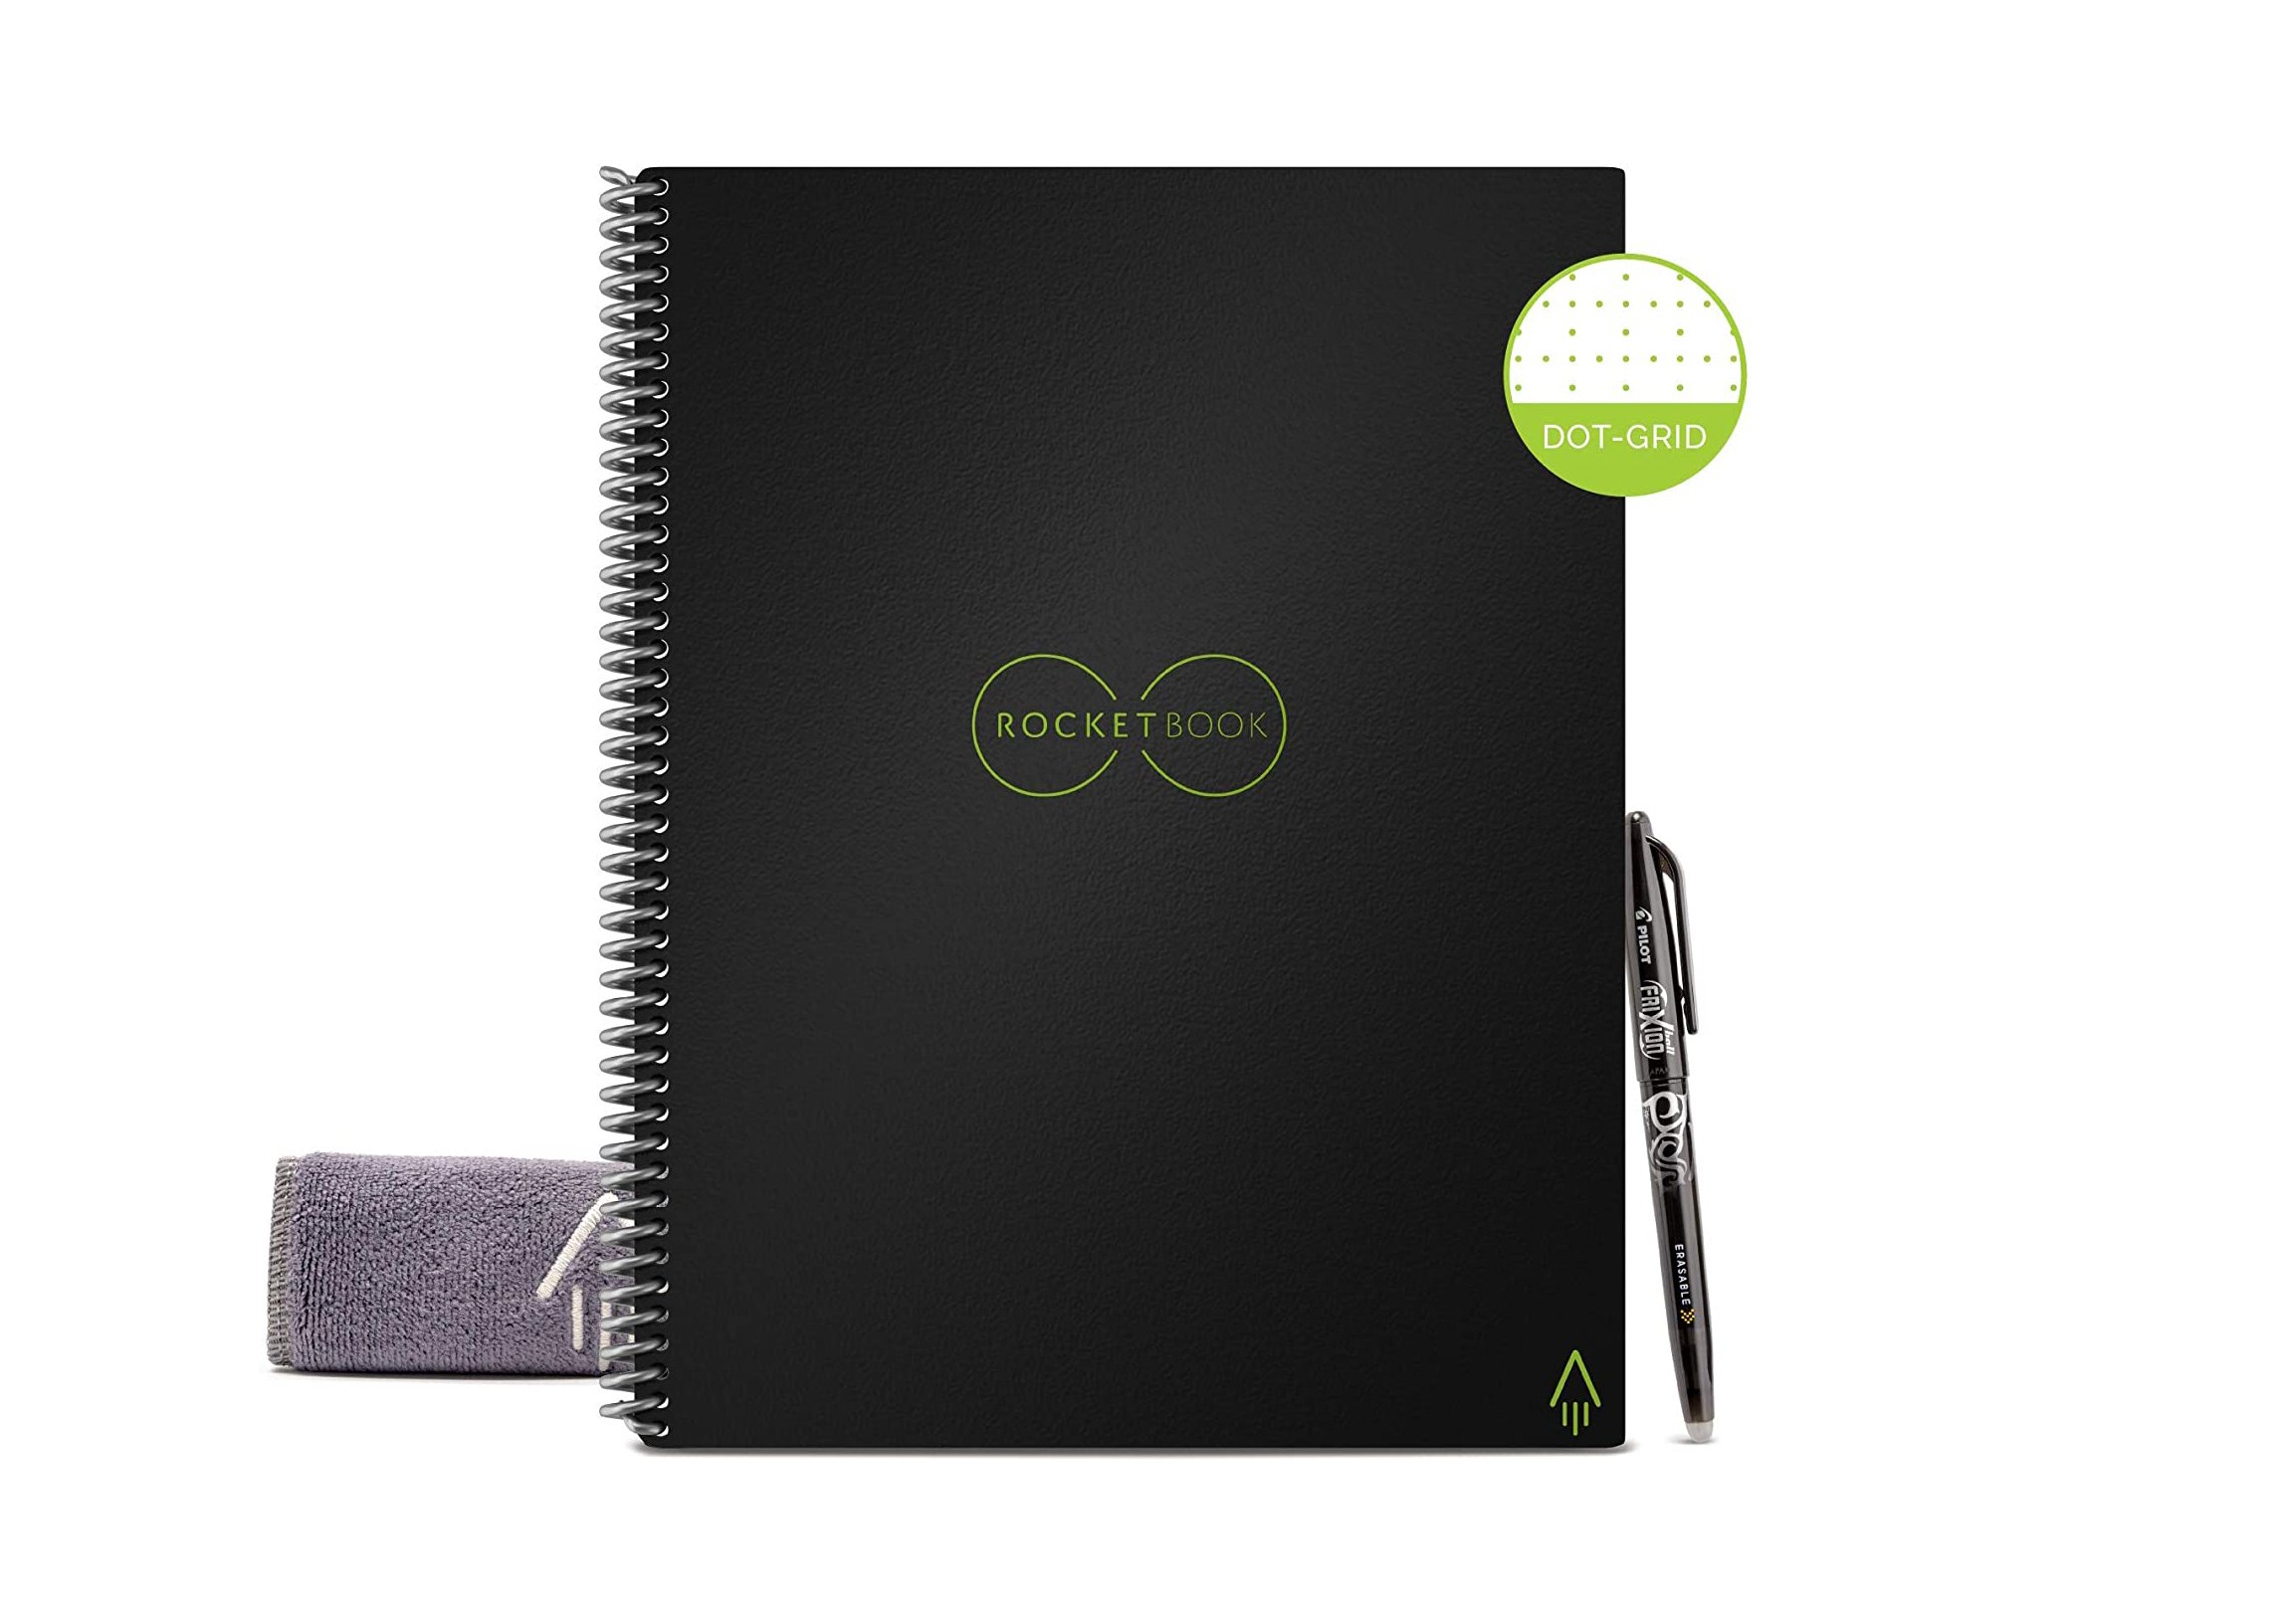 Rocketbook Core Smart Reusable Notebook on white background